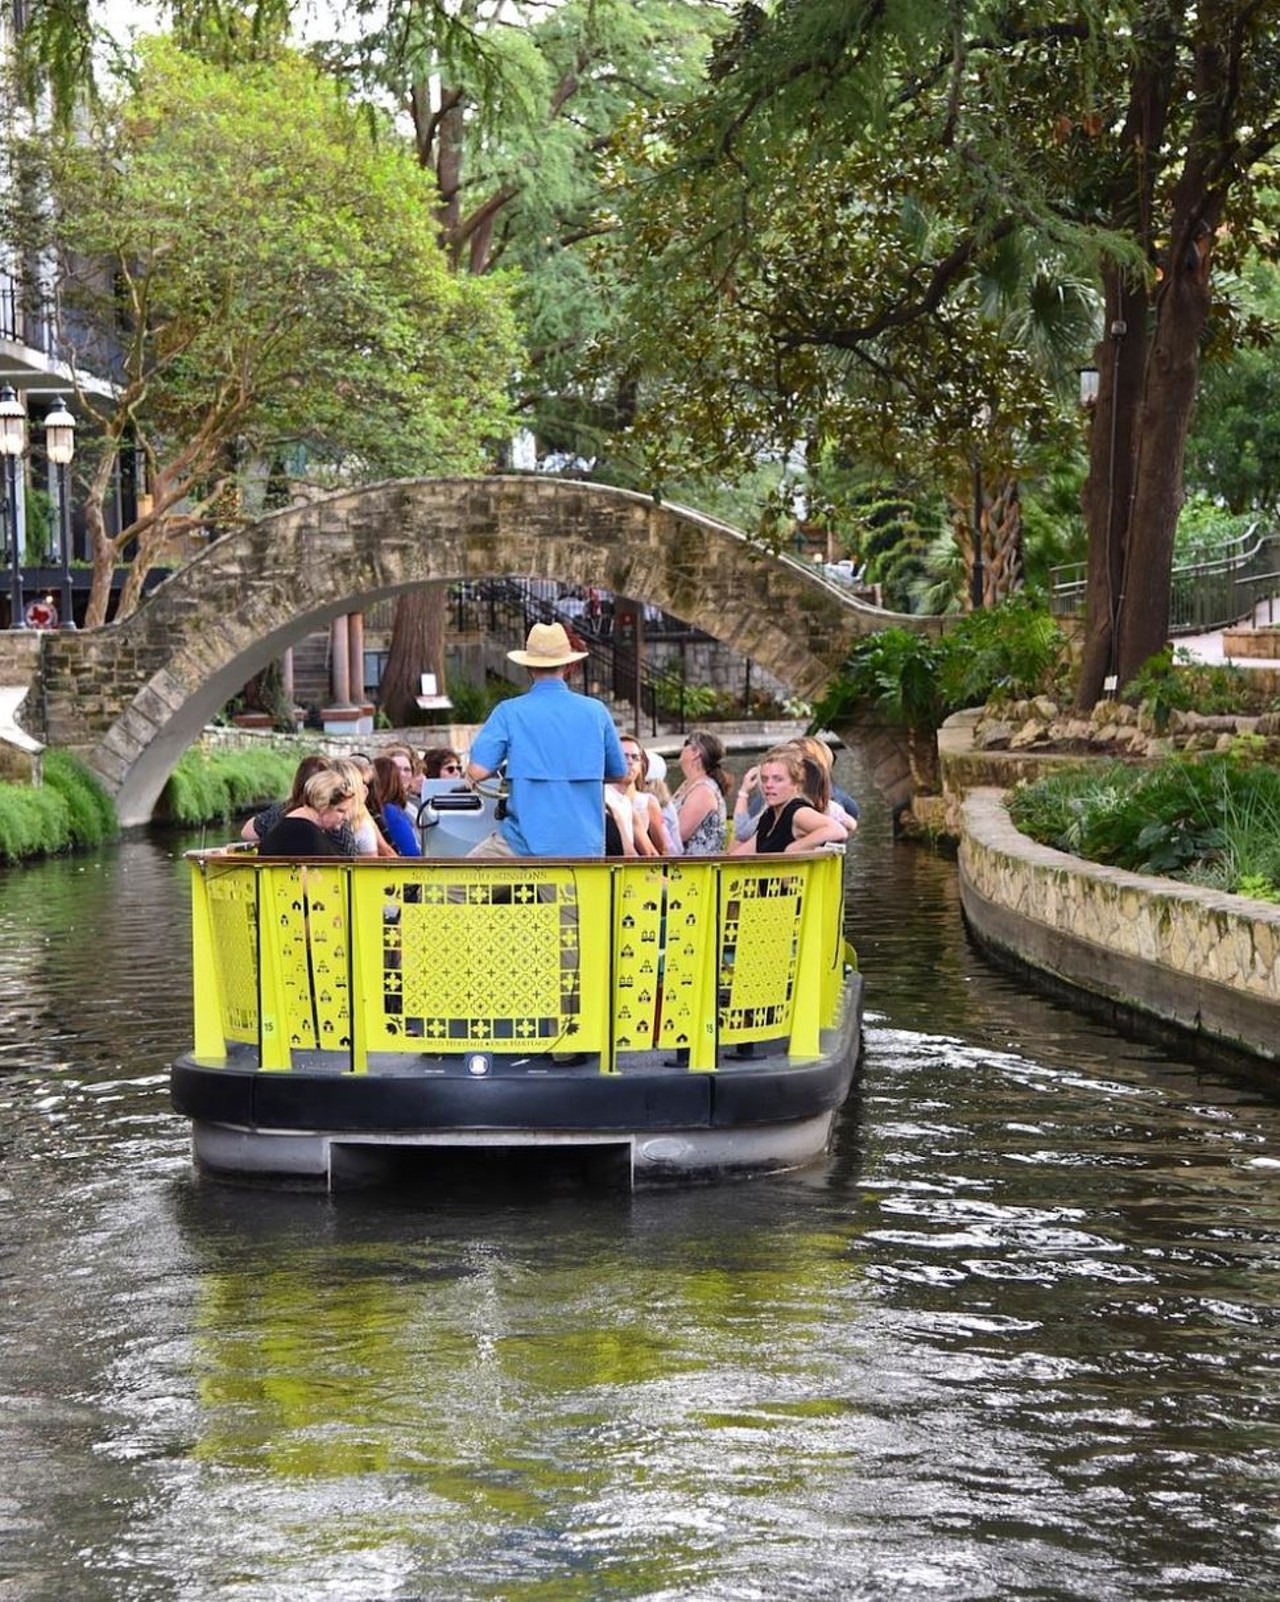 Riding in a barge on the San Antonio River
Riding a barge through downtown SA? This may be one of the oldest tourist traps on this list. Even though these chugging boats have since had a facelift, they've been floating down the San Antonio River since the ‘60s. Hasn’t everyone done this already? Plus, you can now kayak down the river yourself, and that sounds a like a fun new spin. 
Photo via Instagram / goriocruises